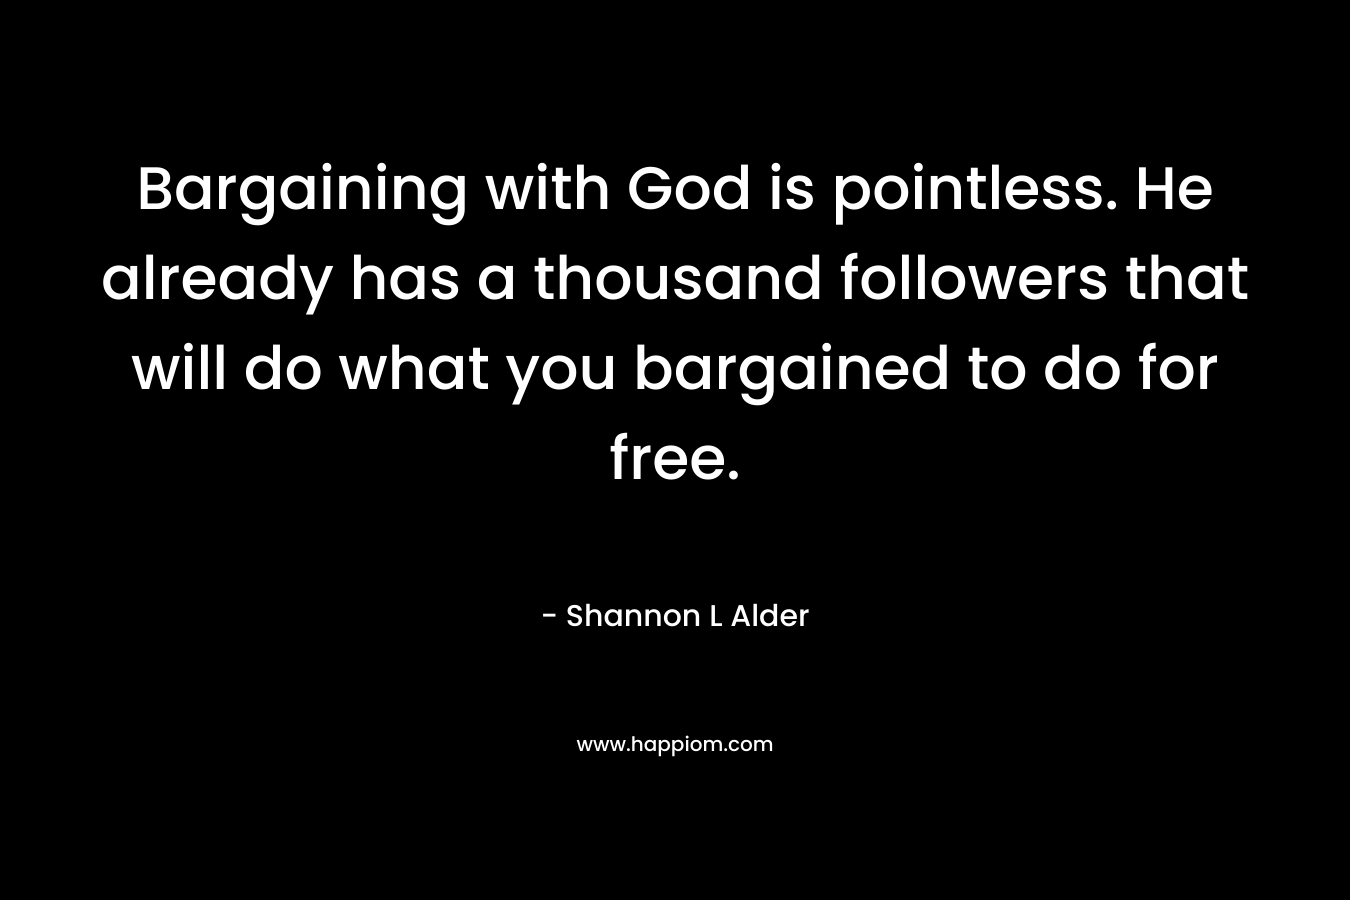 Bargaining with God is pointless. He already has a thousand followers that will do what you bargained to do for free. – Shannon L Alder